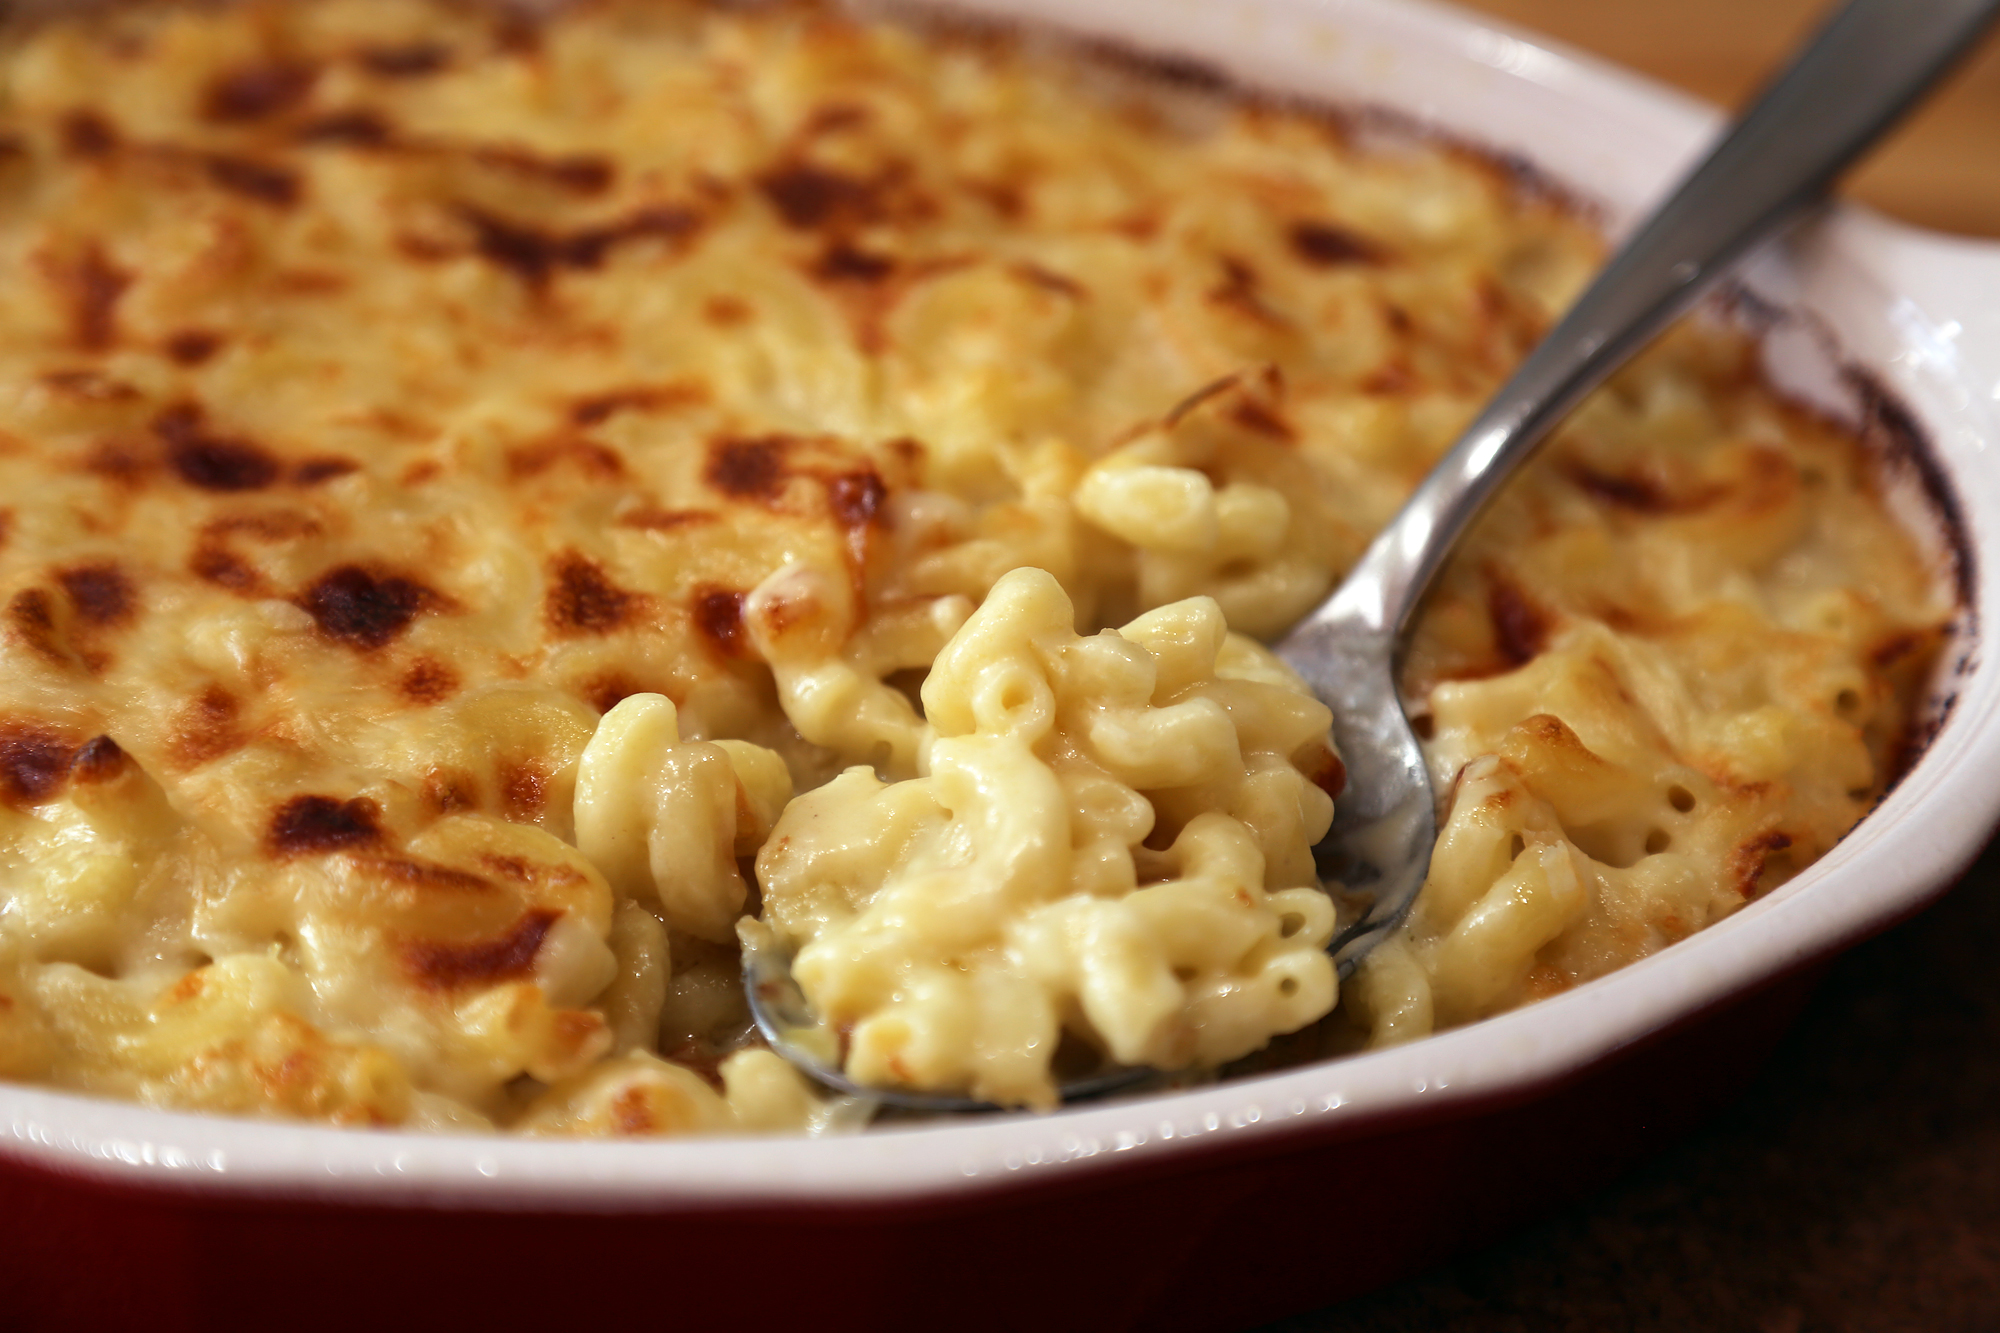 Serve the homemade mac and cheese.